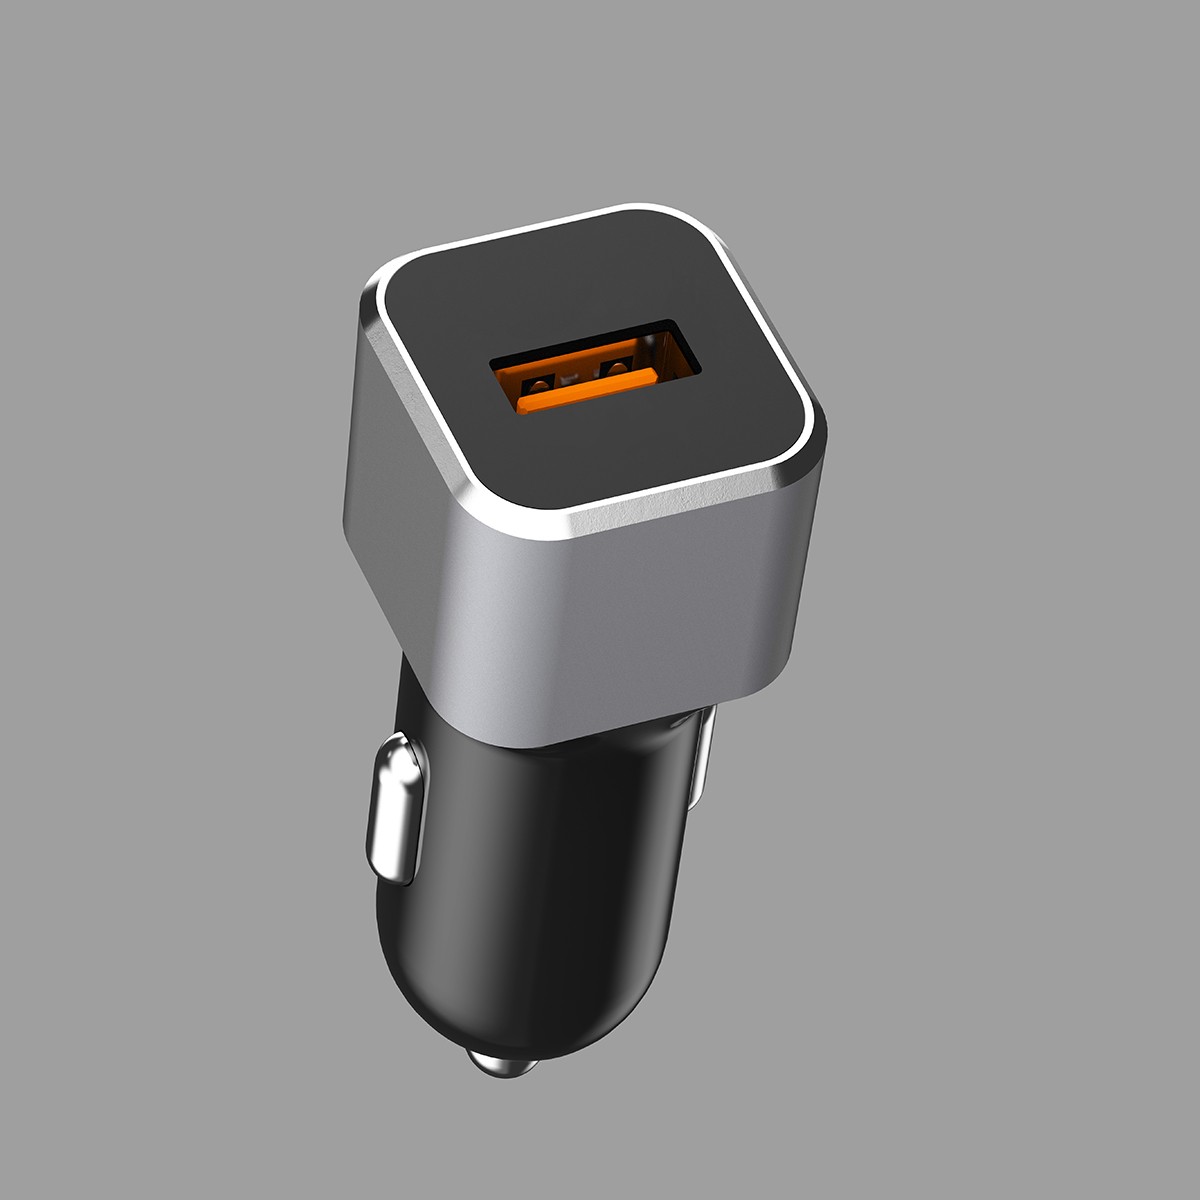 OEM Car Charger